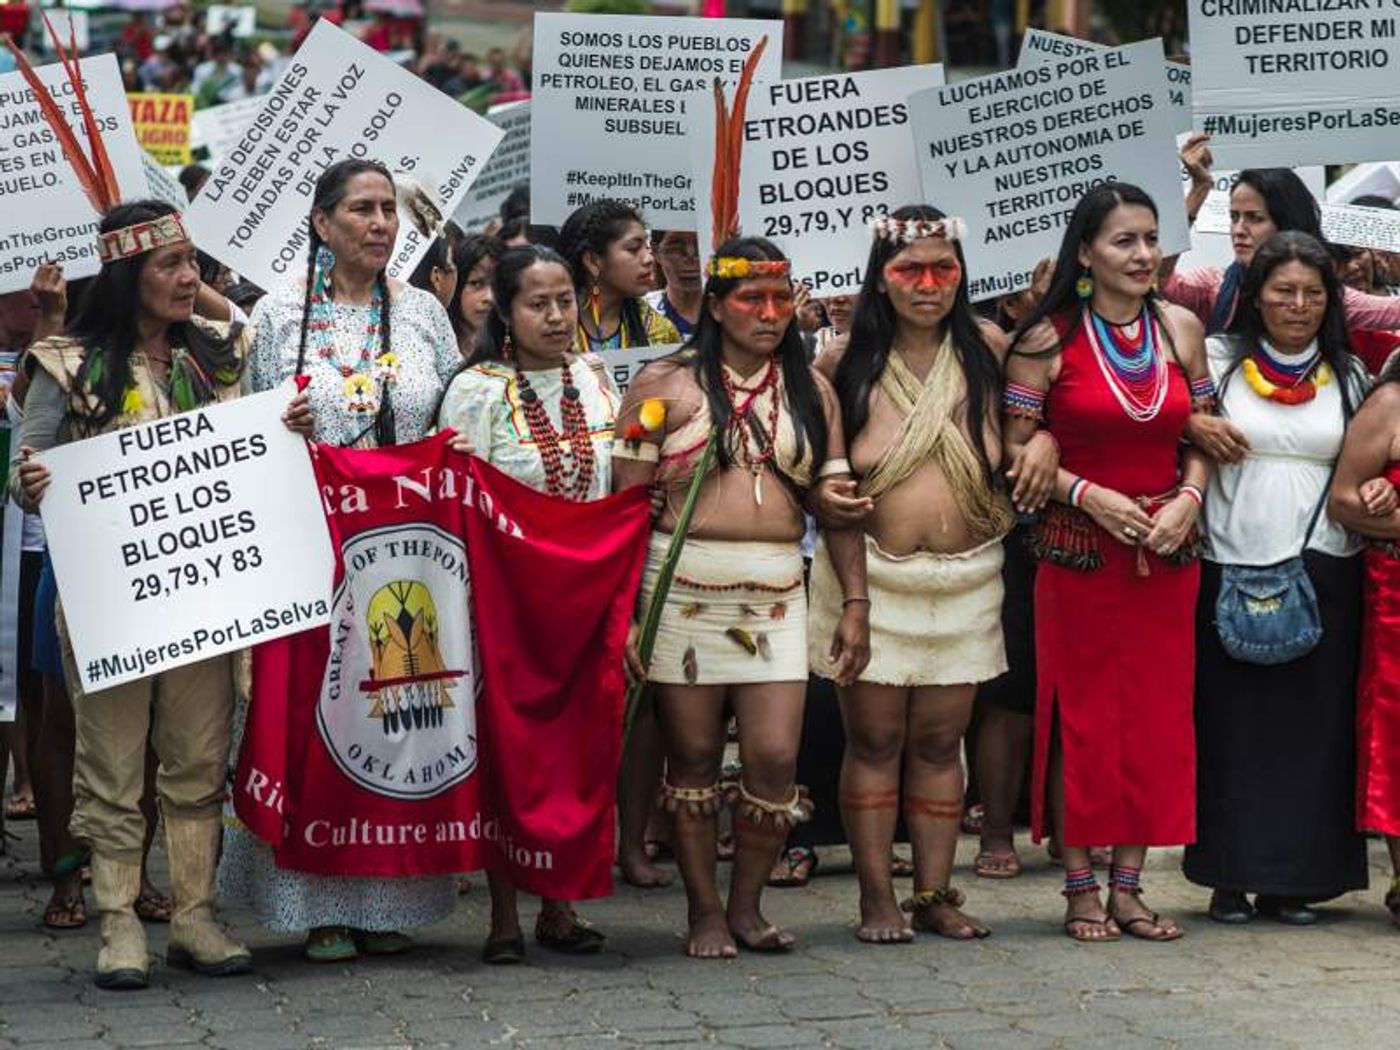 Over 500 Indigenous Women of the Amazon and Allies March for Climate Justice, Indigenous Rights on International Women's Day. Photo: Amazon Watch